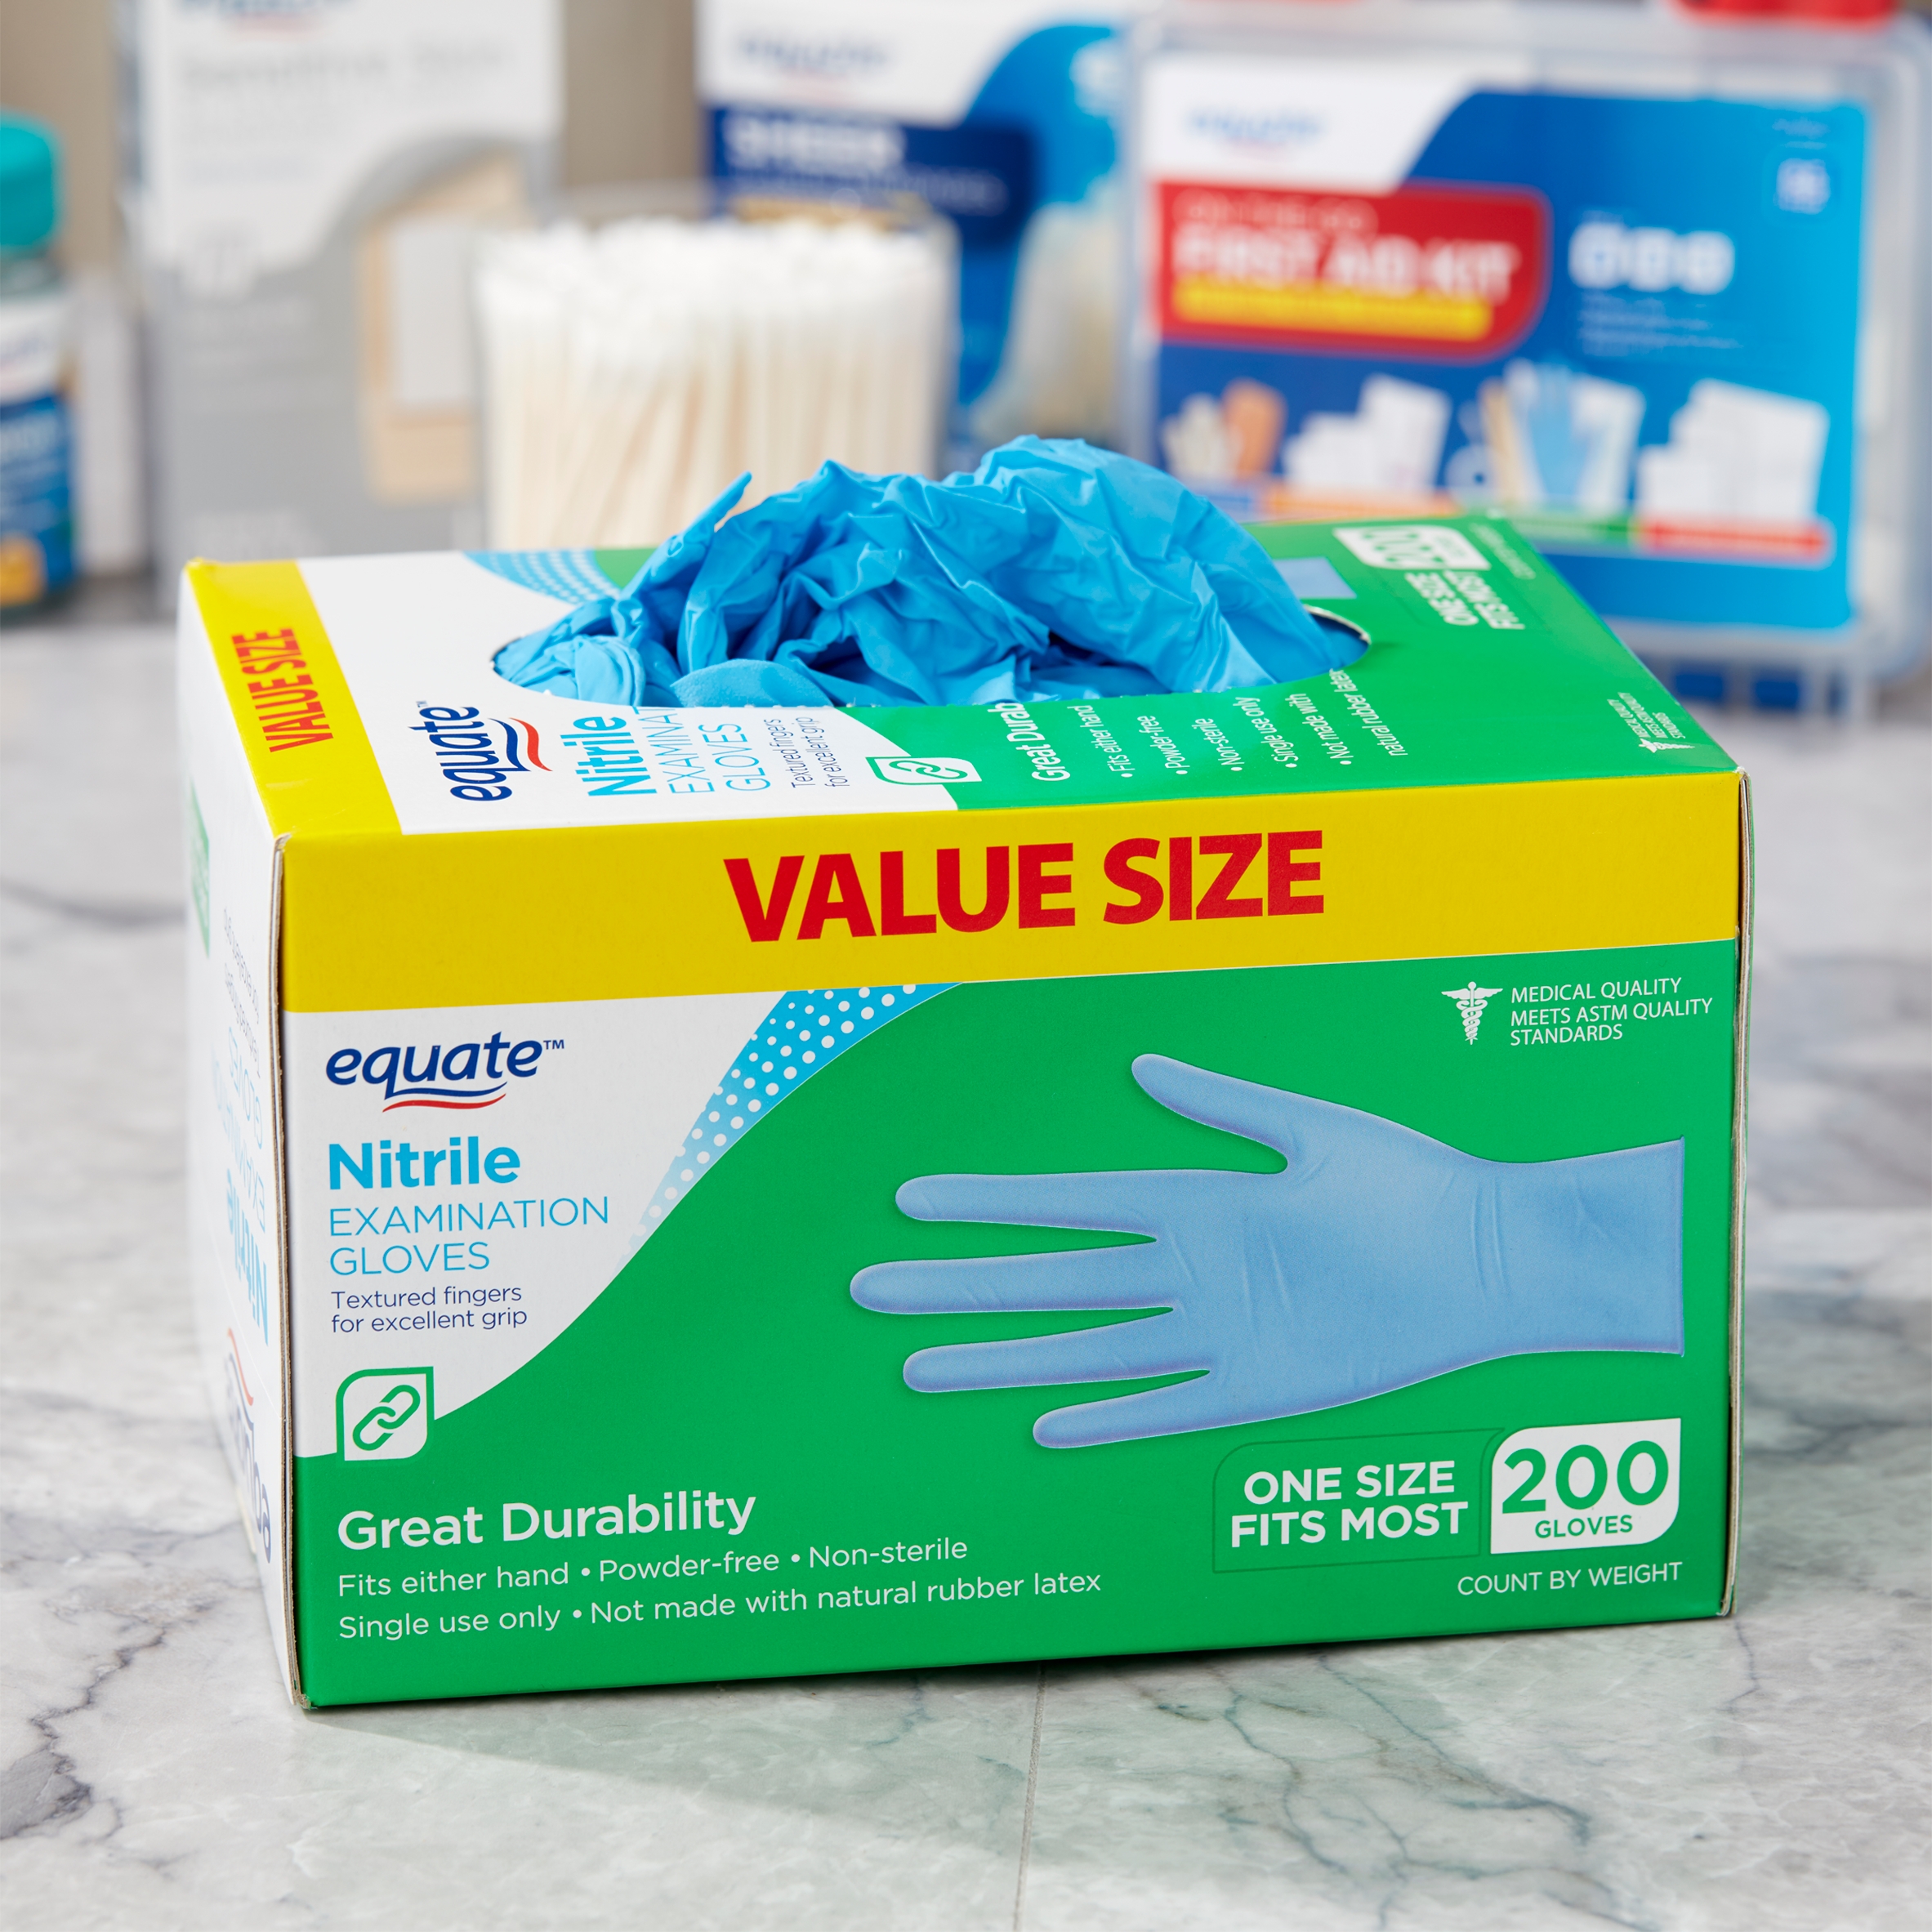 Equate Nitrile Examination Gloves Value Size, 200 count - image 2 of 10